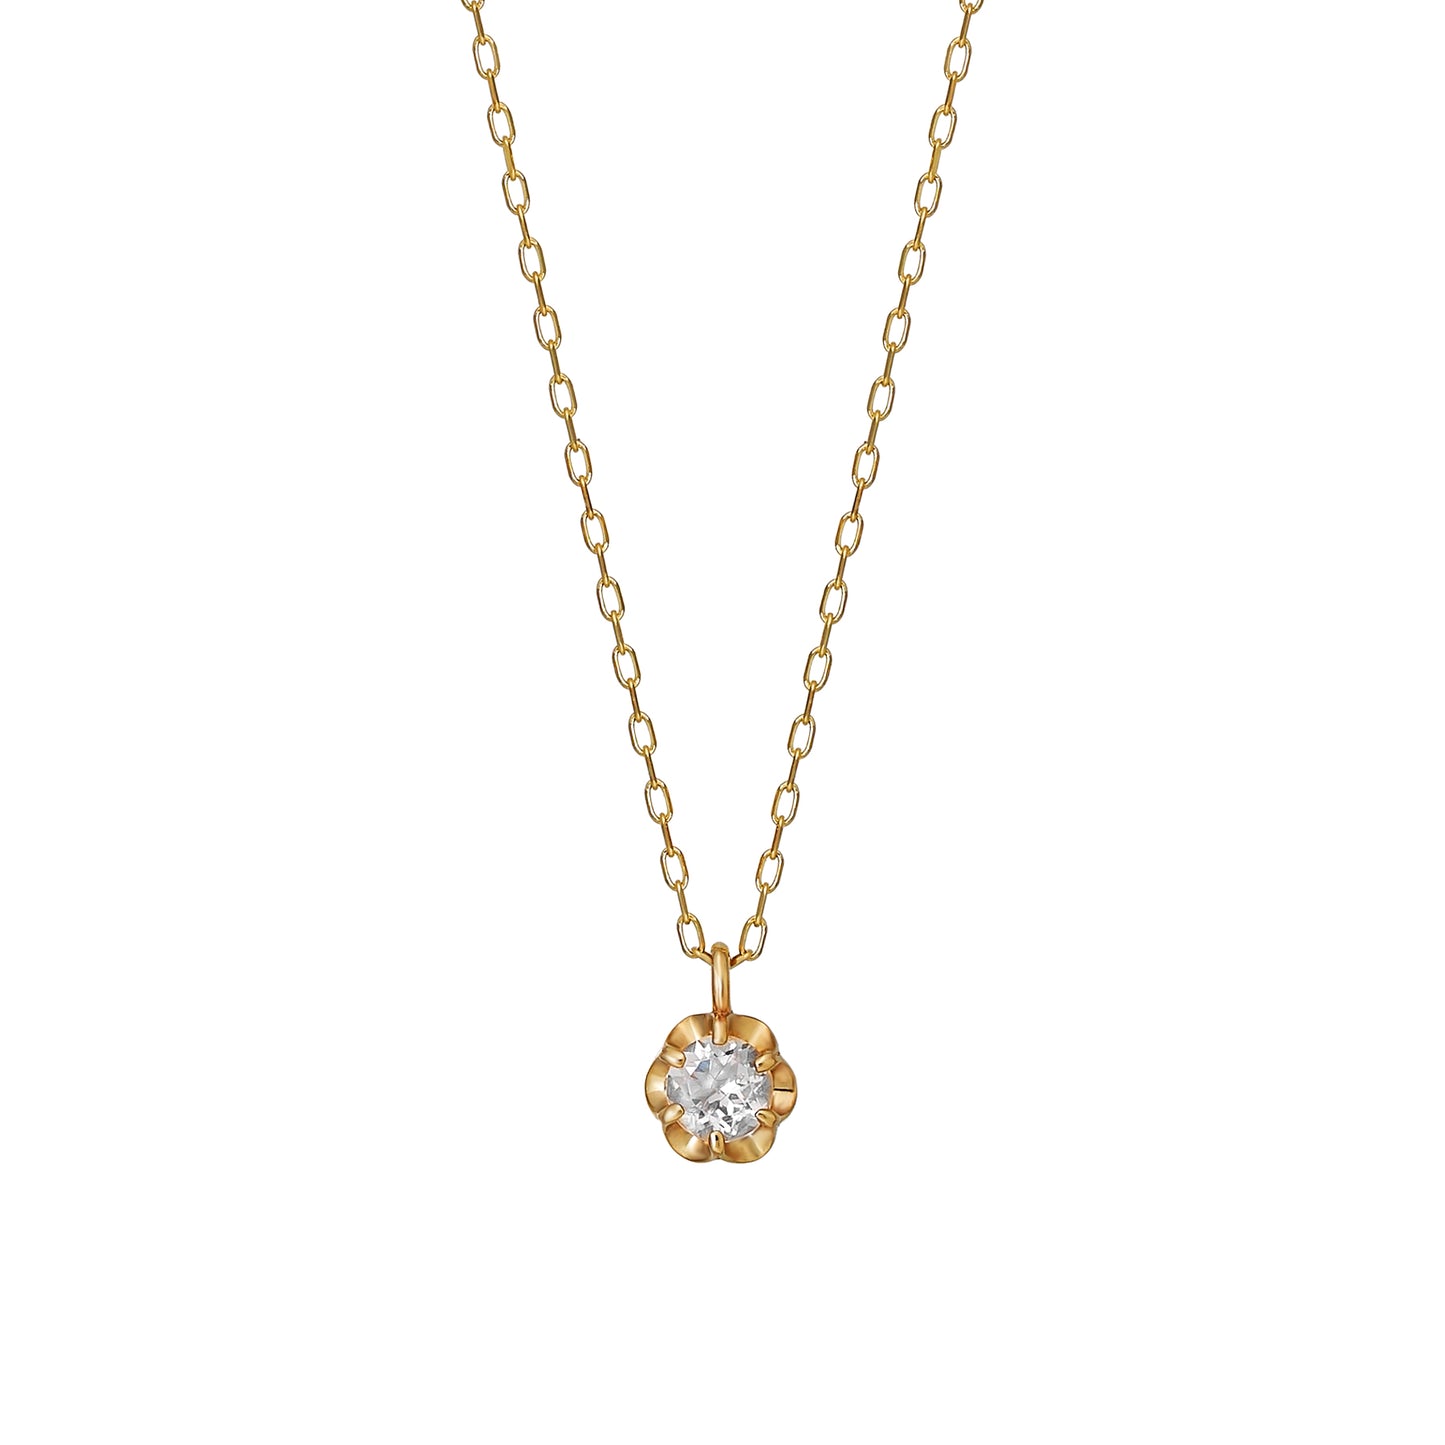 10K Yellow Gold Morganite Full Bloom Birthstone Necklace - Product Image